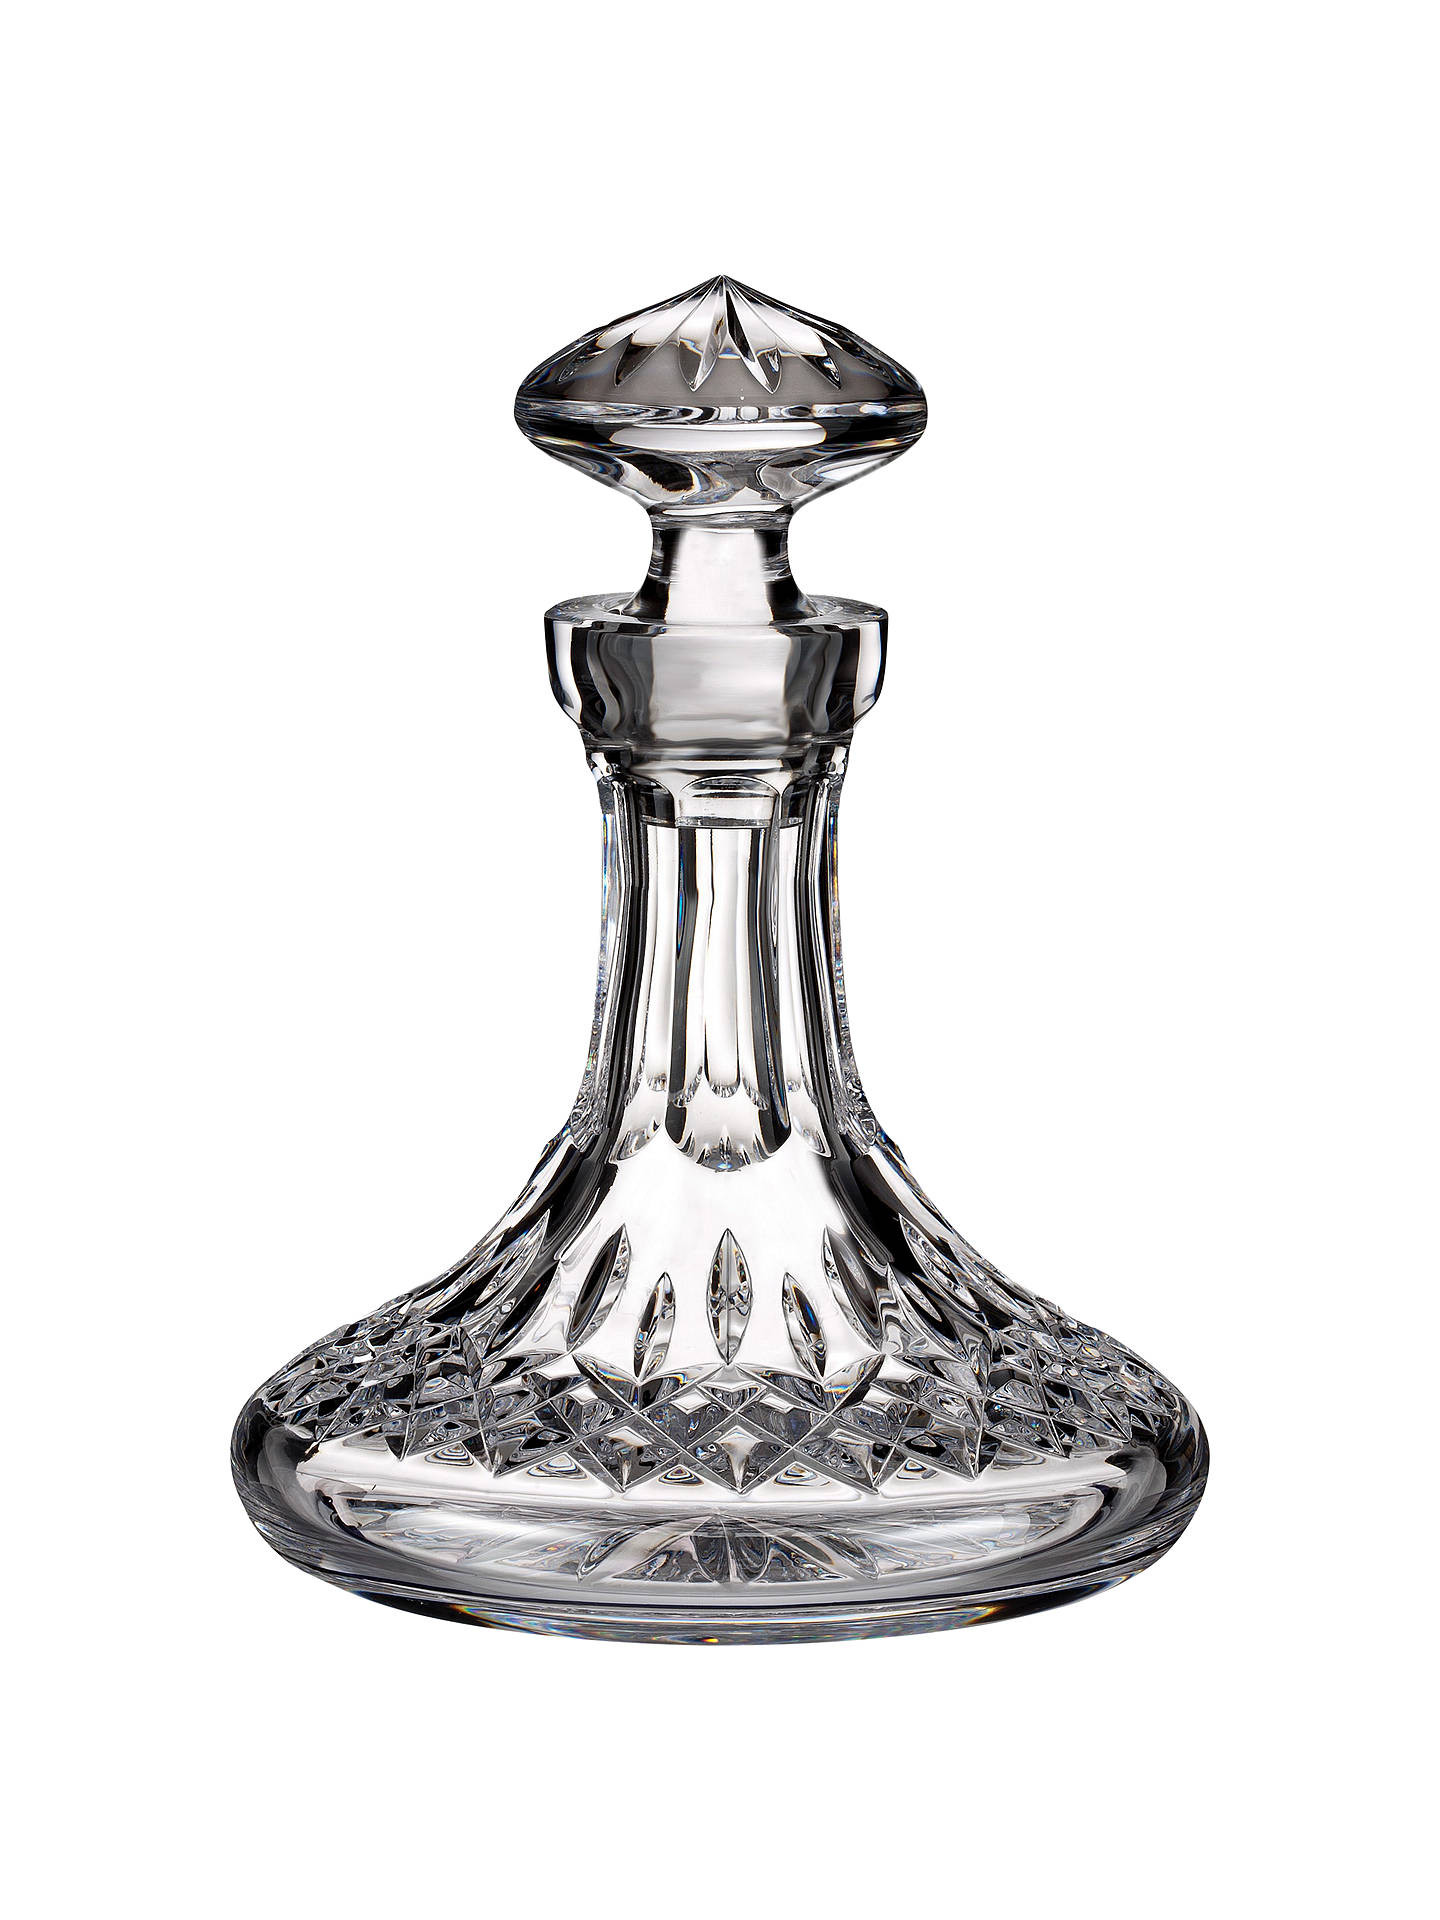 waterford lismore castle vase of waterford lismore connoisseur cut lead crystal mini ships decanter pertaining to buywaterford lismore connoisseur cut lead crystal mini ships decanter 550ml online at johnlewis